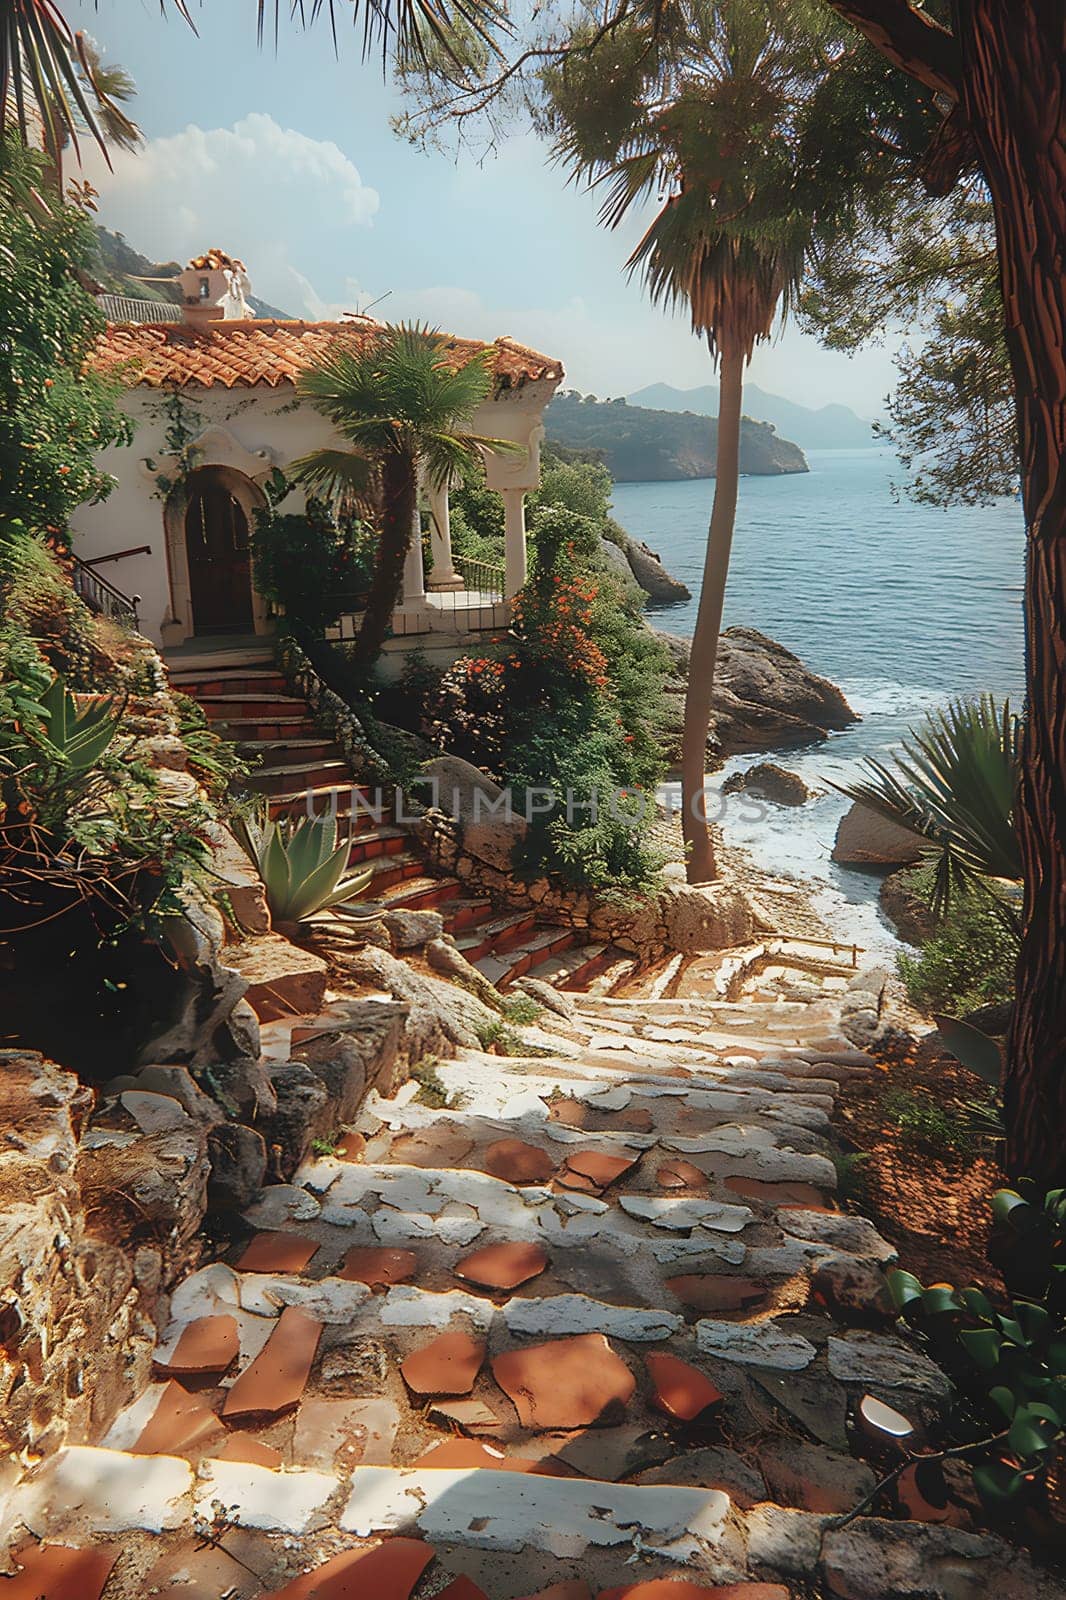 A winding staircase lined with lush green plants leads up to a house perched on a cliff overlooking the ocean, surrounded by trees and a vast natural landscape